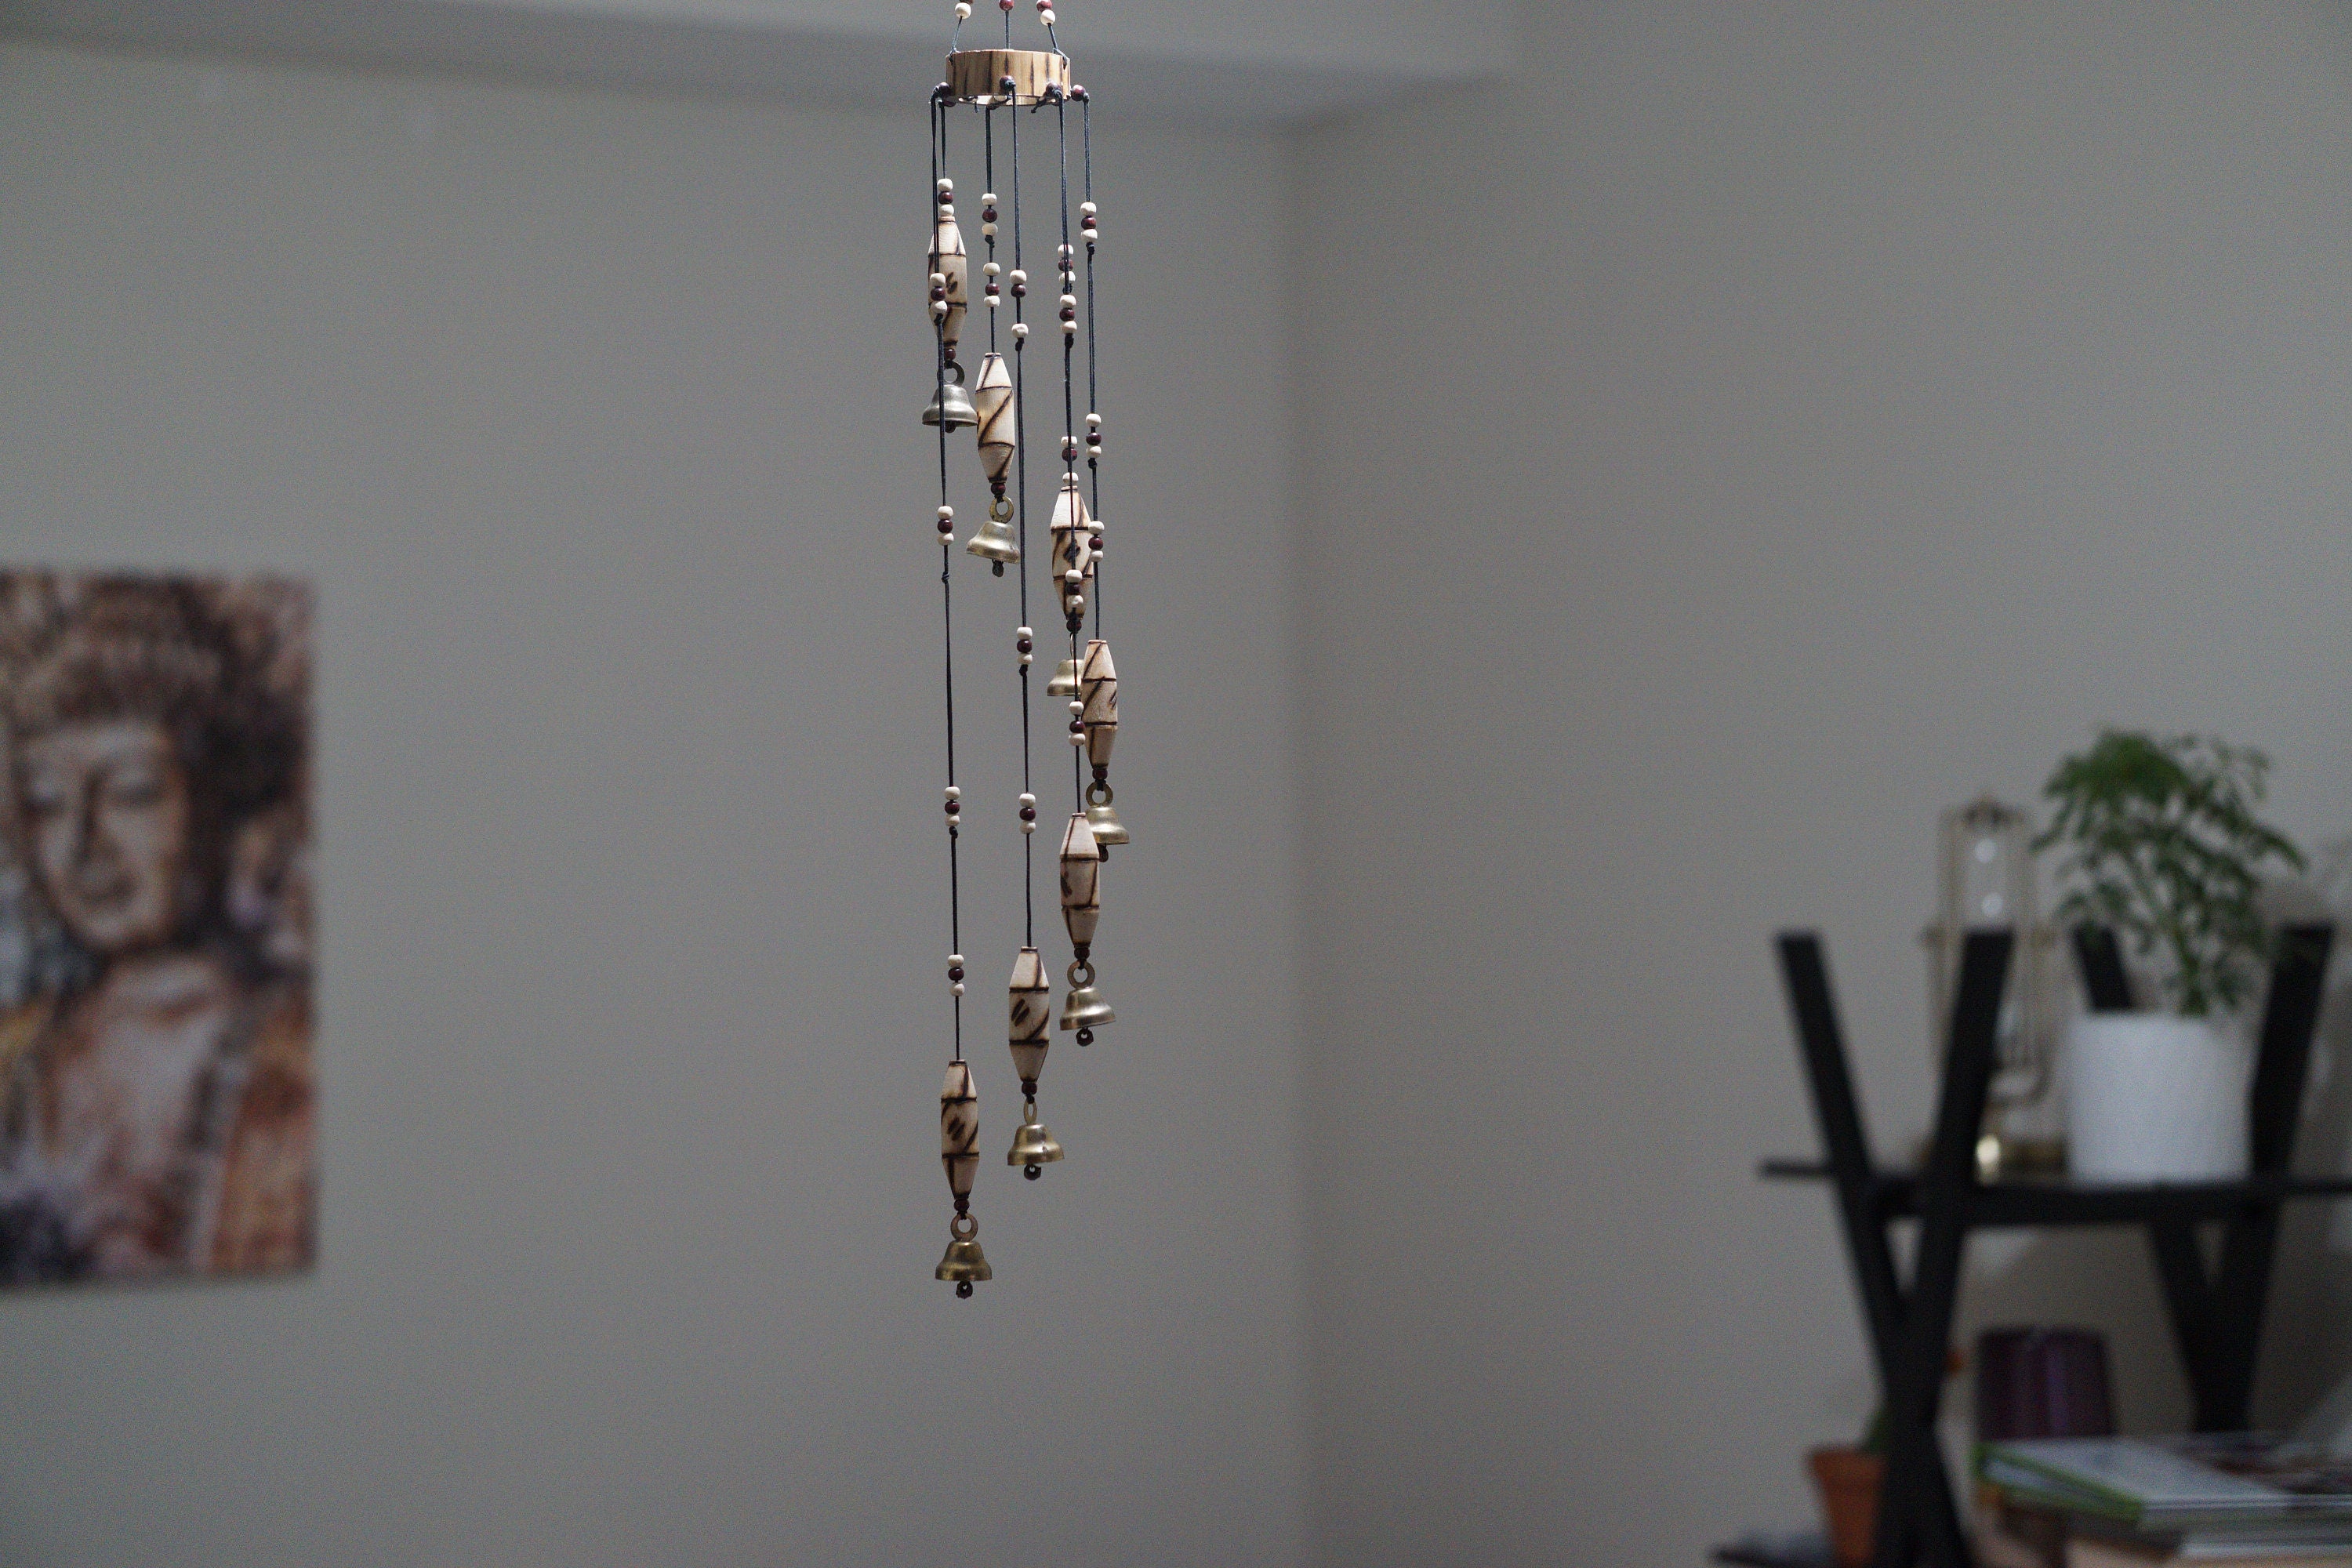 Handmade Windchime with artsitic wooden pieces with Brass Bells making peaceful sounds